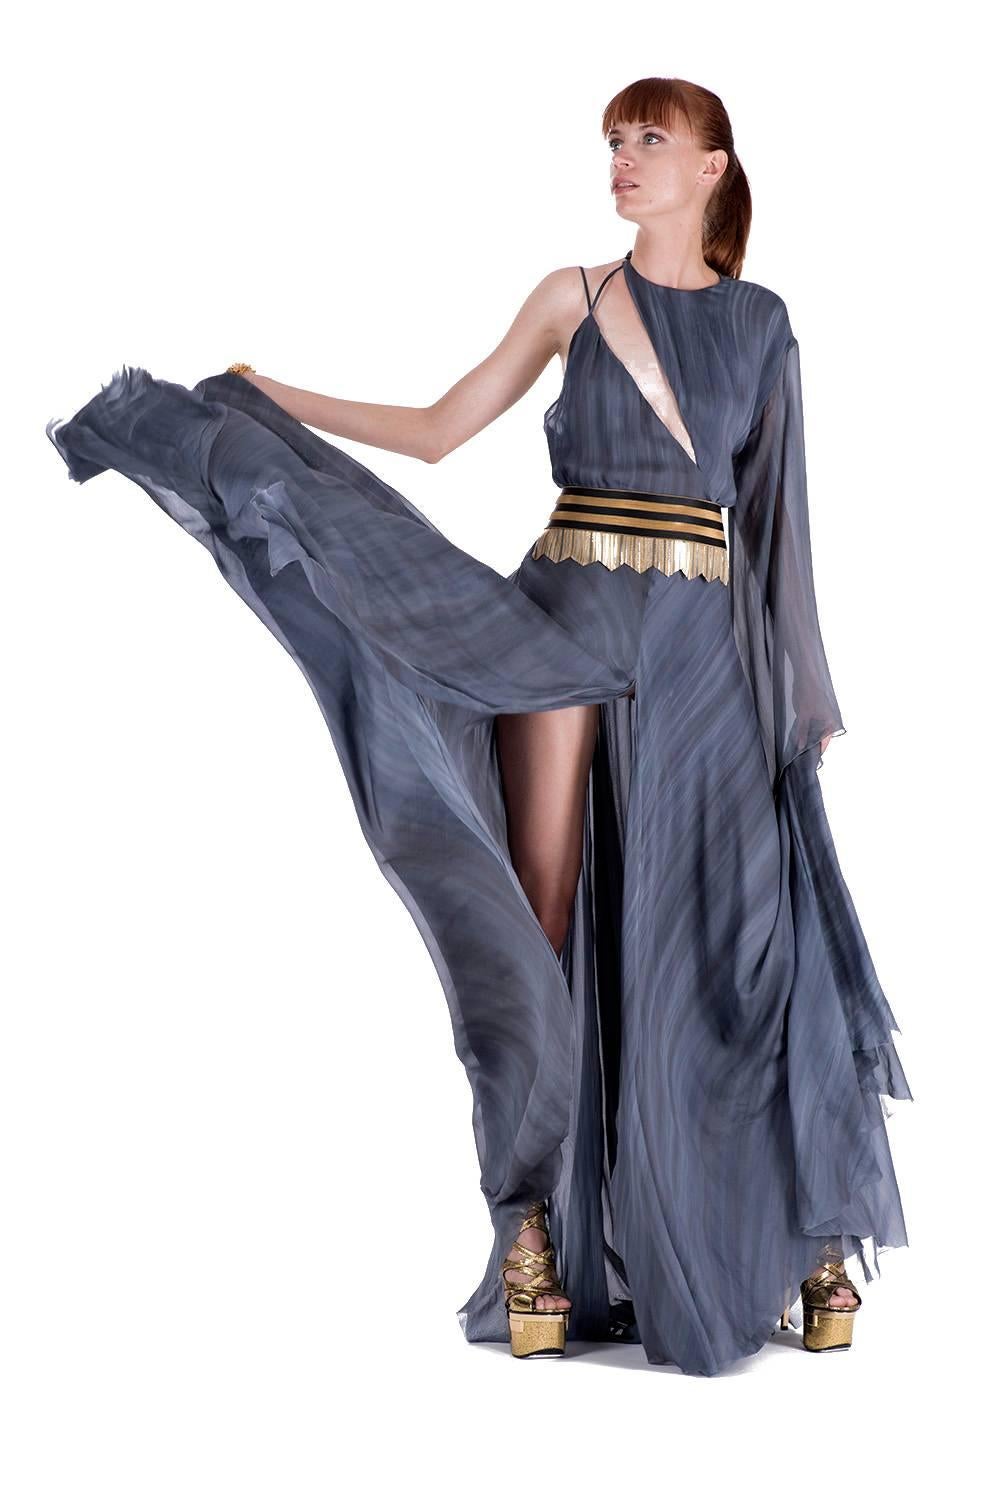 Gray S/S 2013 Look # 44 NEW VERSACE DOVE GREY LONG DRESS GOWN with ONE SLEEVE 38 - 2